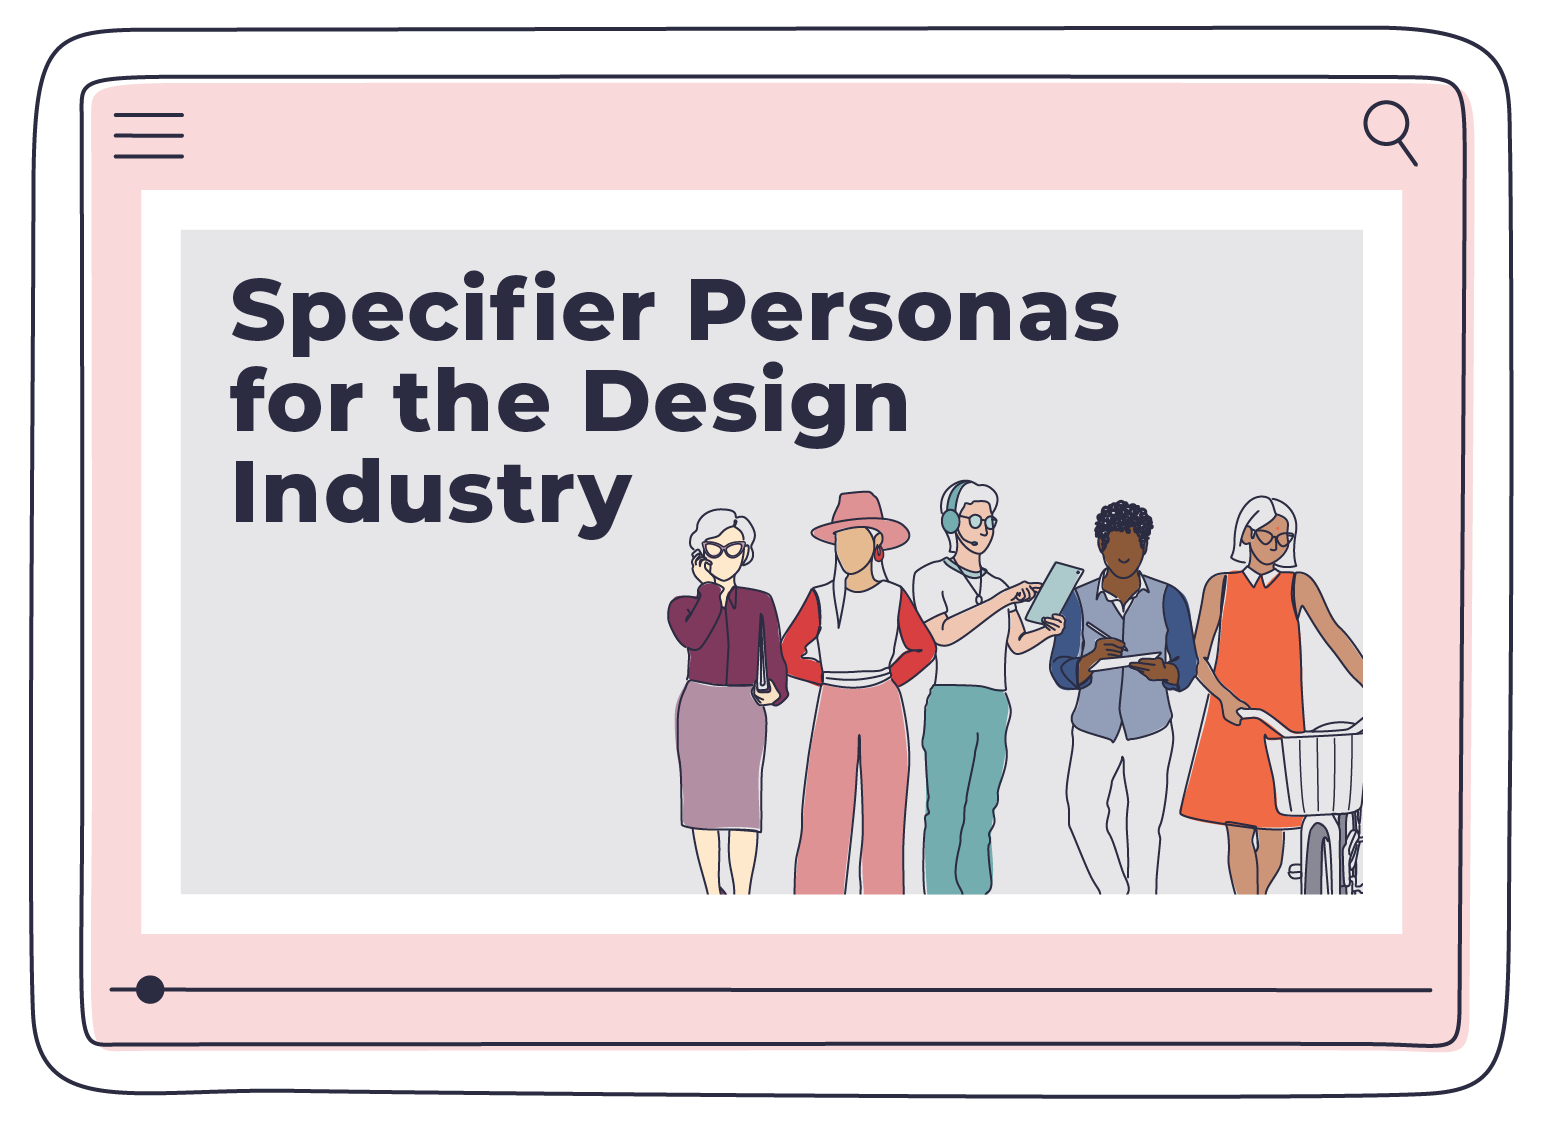 Specifier Personas for the Design Industry eCourse and Playbook from ThinkLab